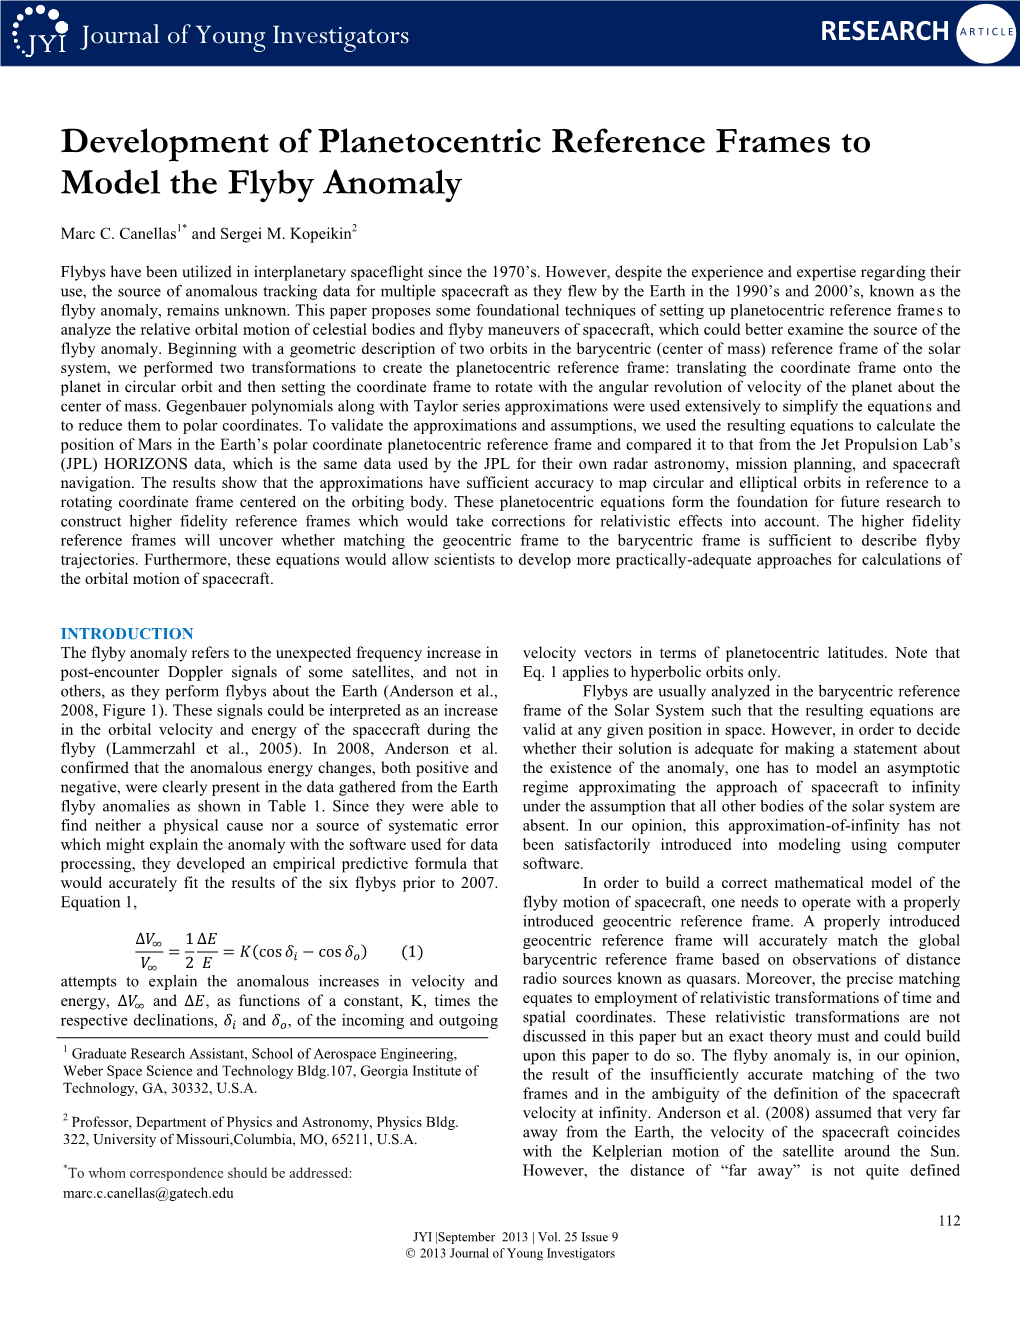 Development of Planetocentric Reference Frames to Model the Flyby Anomaly